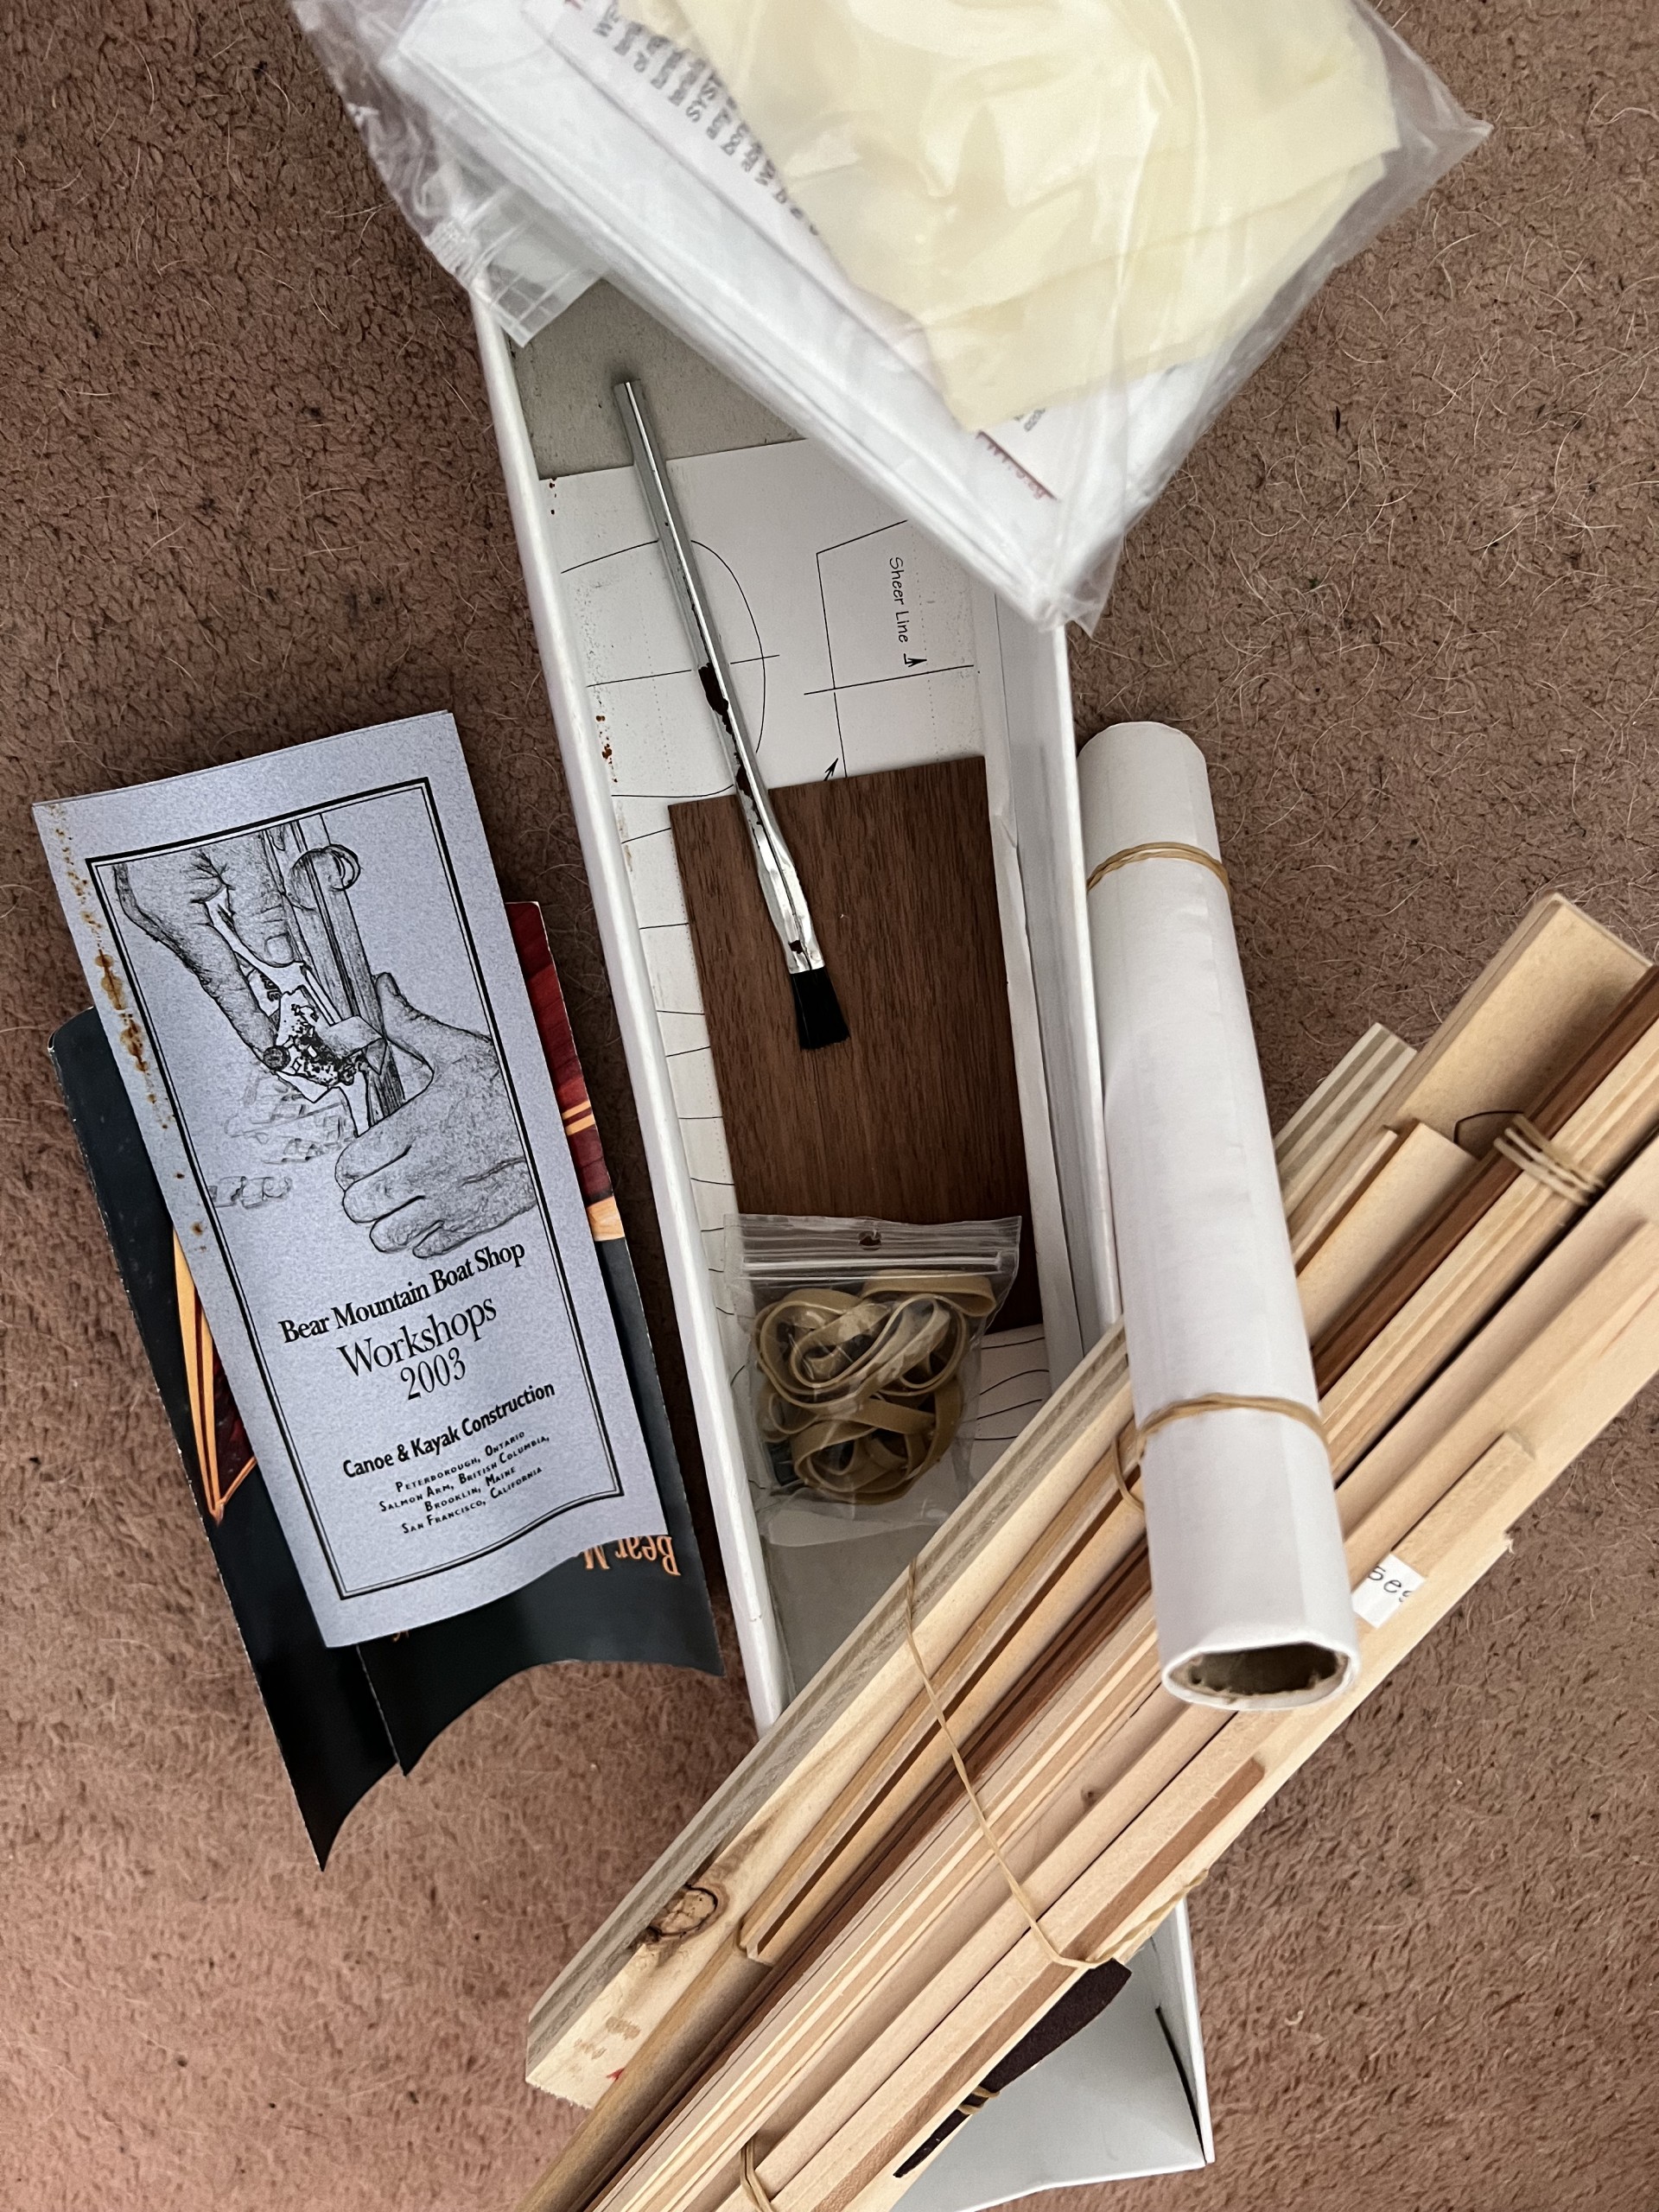 Everything needed to build an authentic 1:12 scale model wooden canoe.